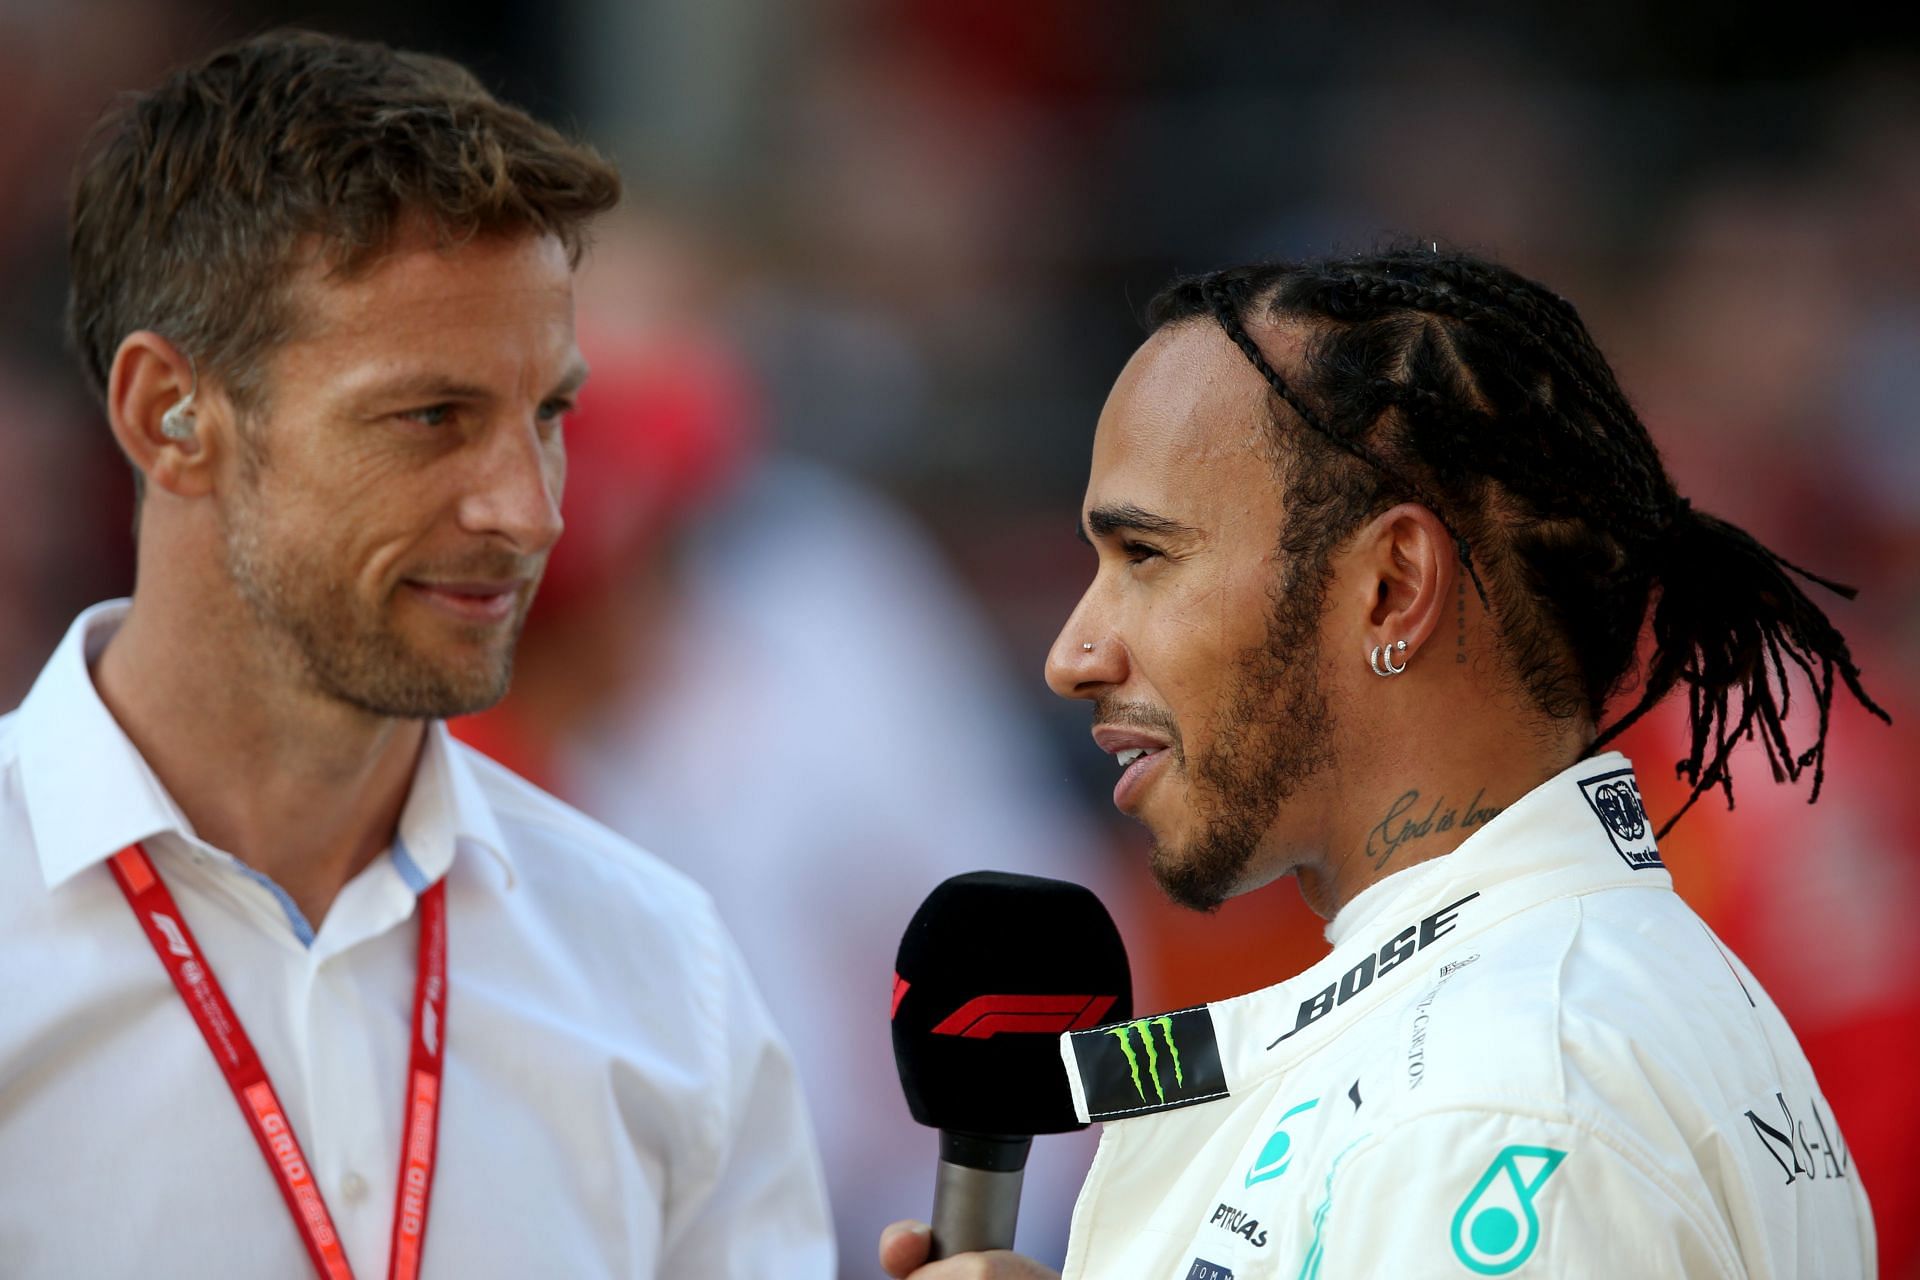 Jenson Button (left) hopes and thinks Lewis Hamilton (right) will return to racing in 2022